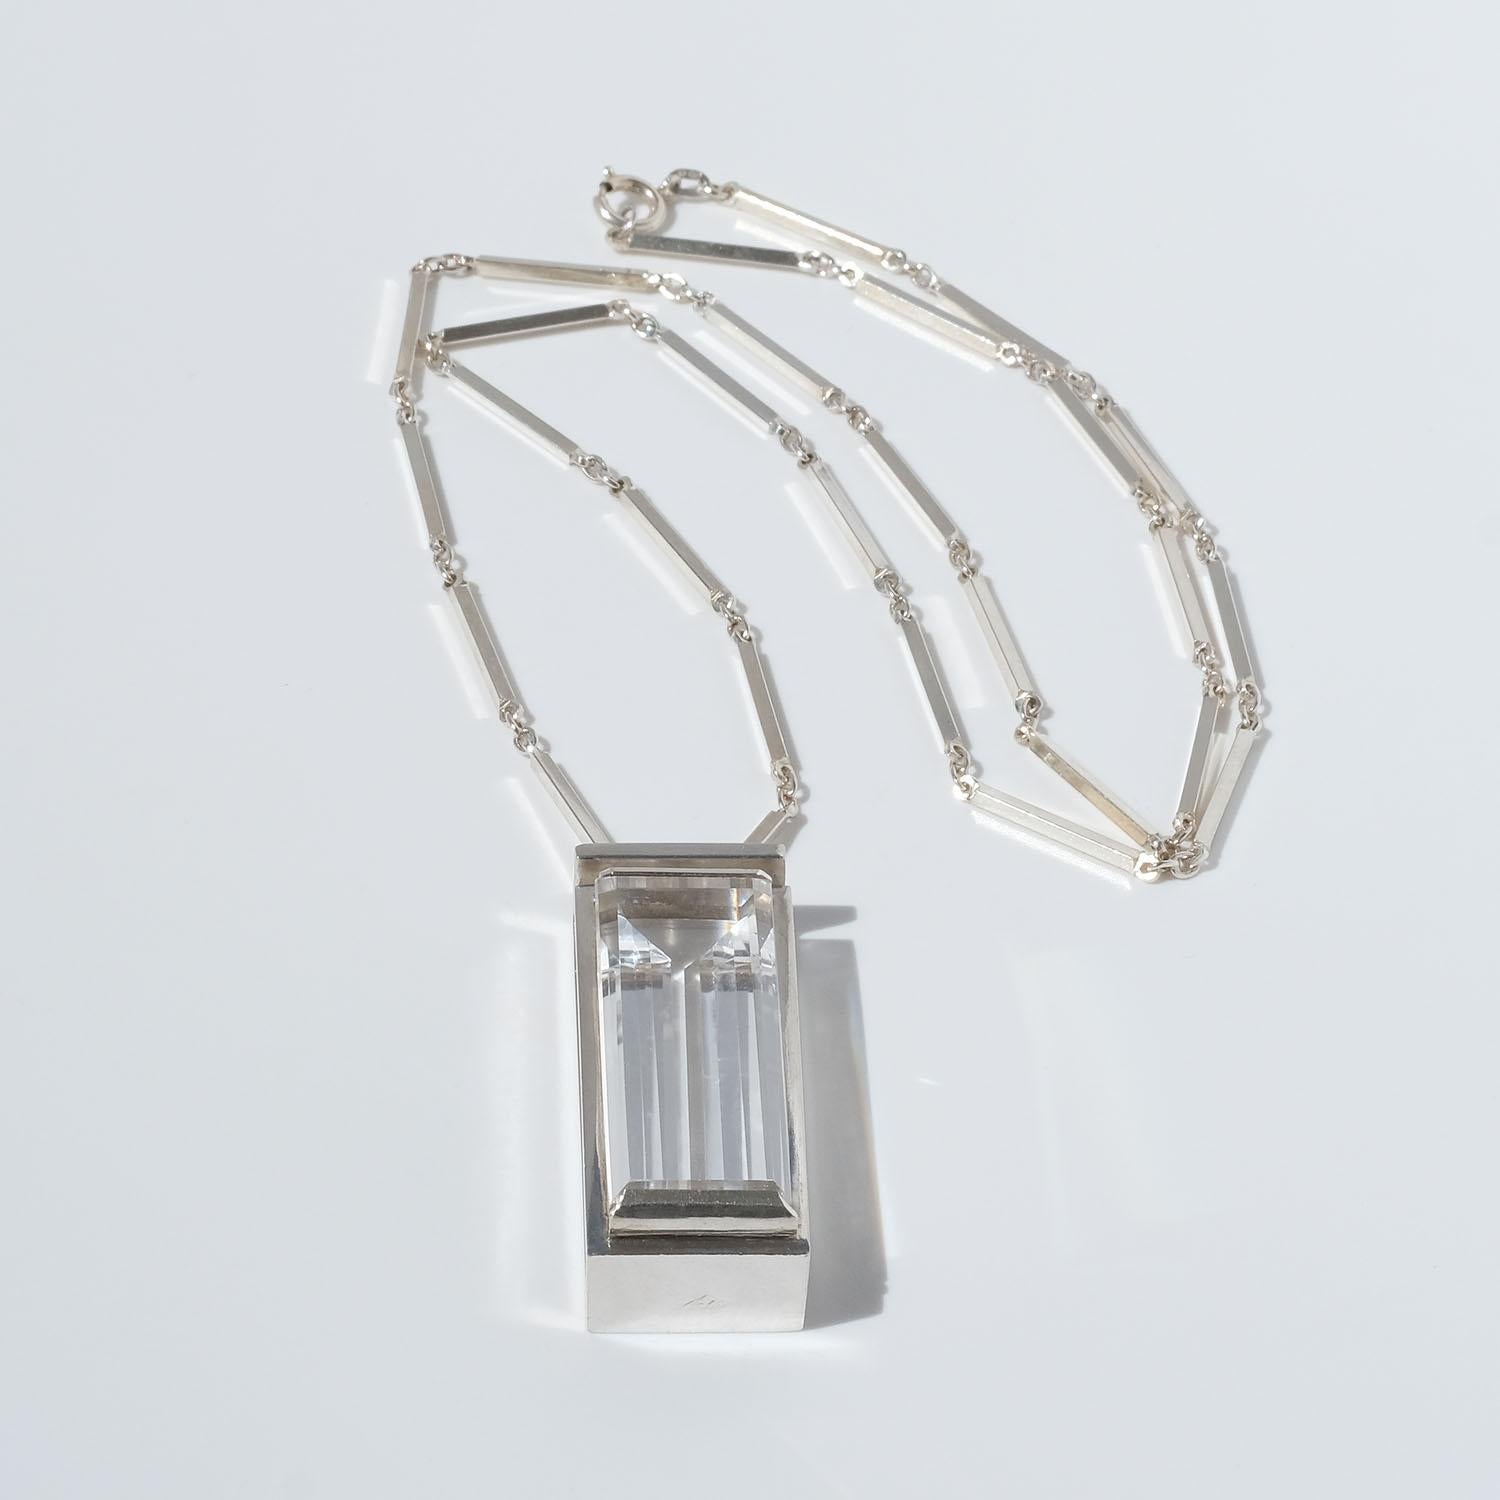 This silver and rock crystal necklace shows upon typical Art Deco style characteristics, such as the ring and bar chain, the pendant with its straight geometric shapes, its shiny surface and the baguette-cut rock crystal.

This elegant necklace fits